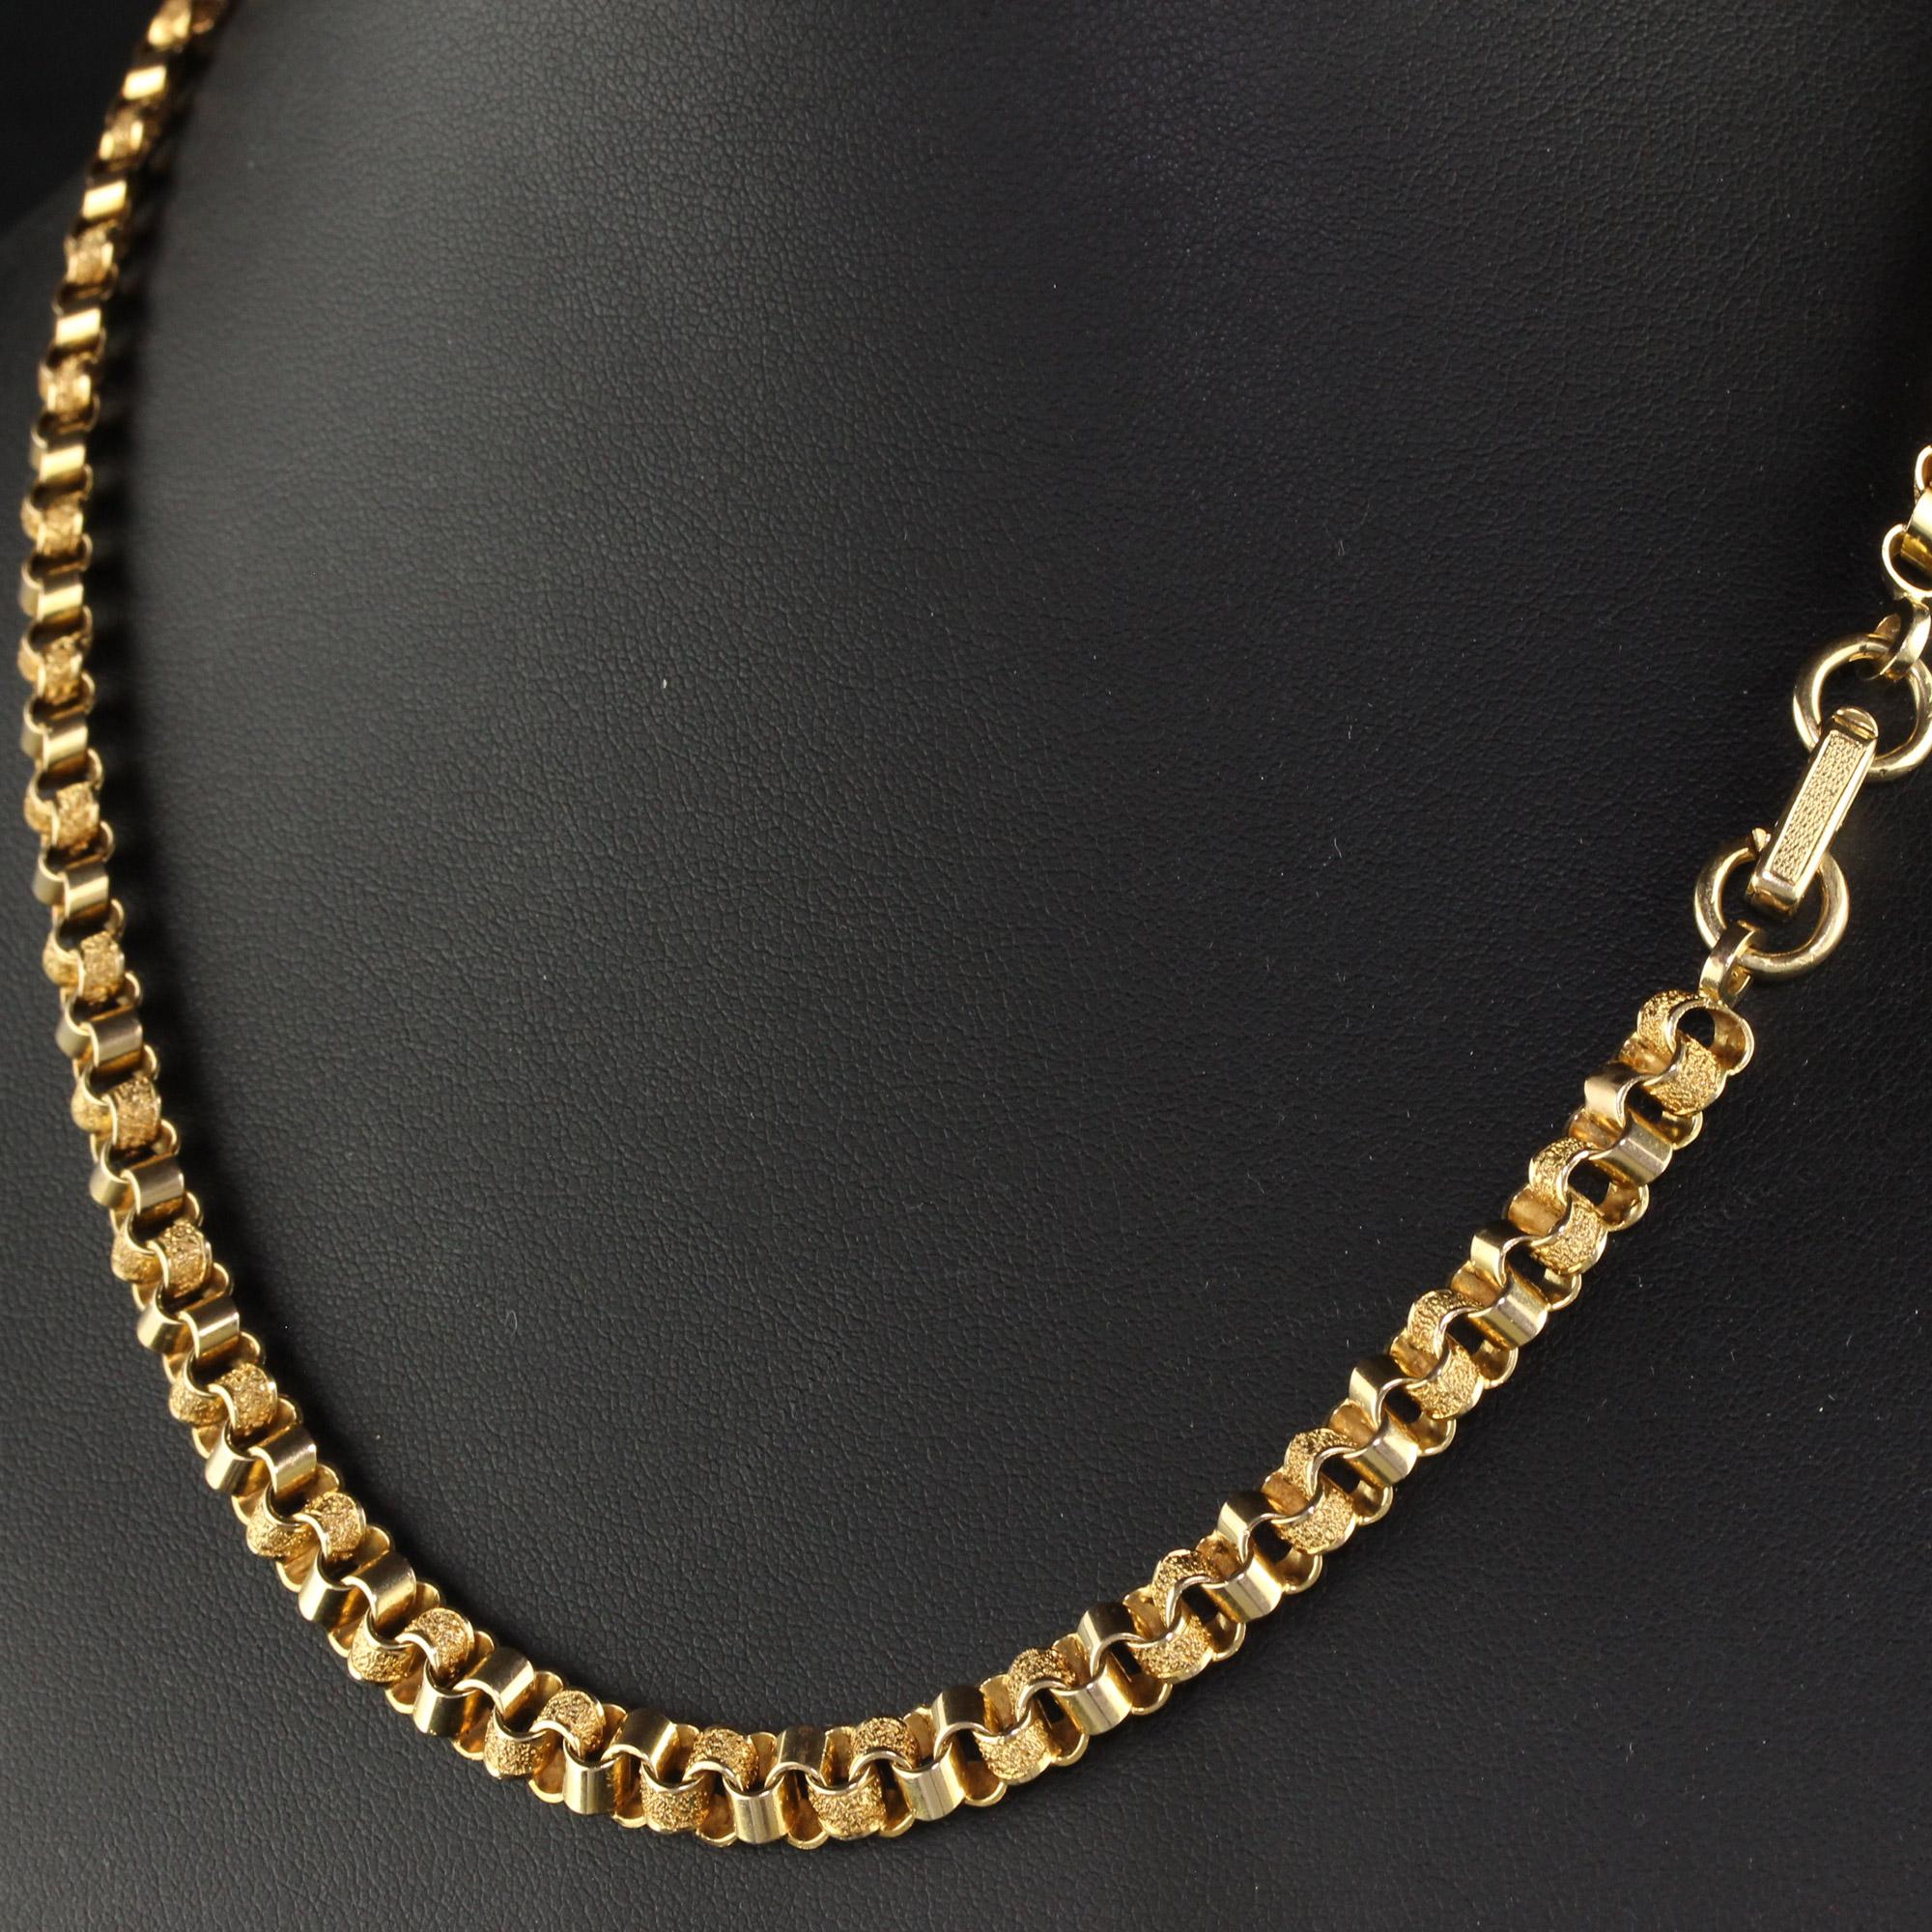 Antique Art Deco 14K Yellow Gold Flat Geometric Link Chain Necklace For Sale 1